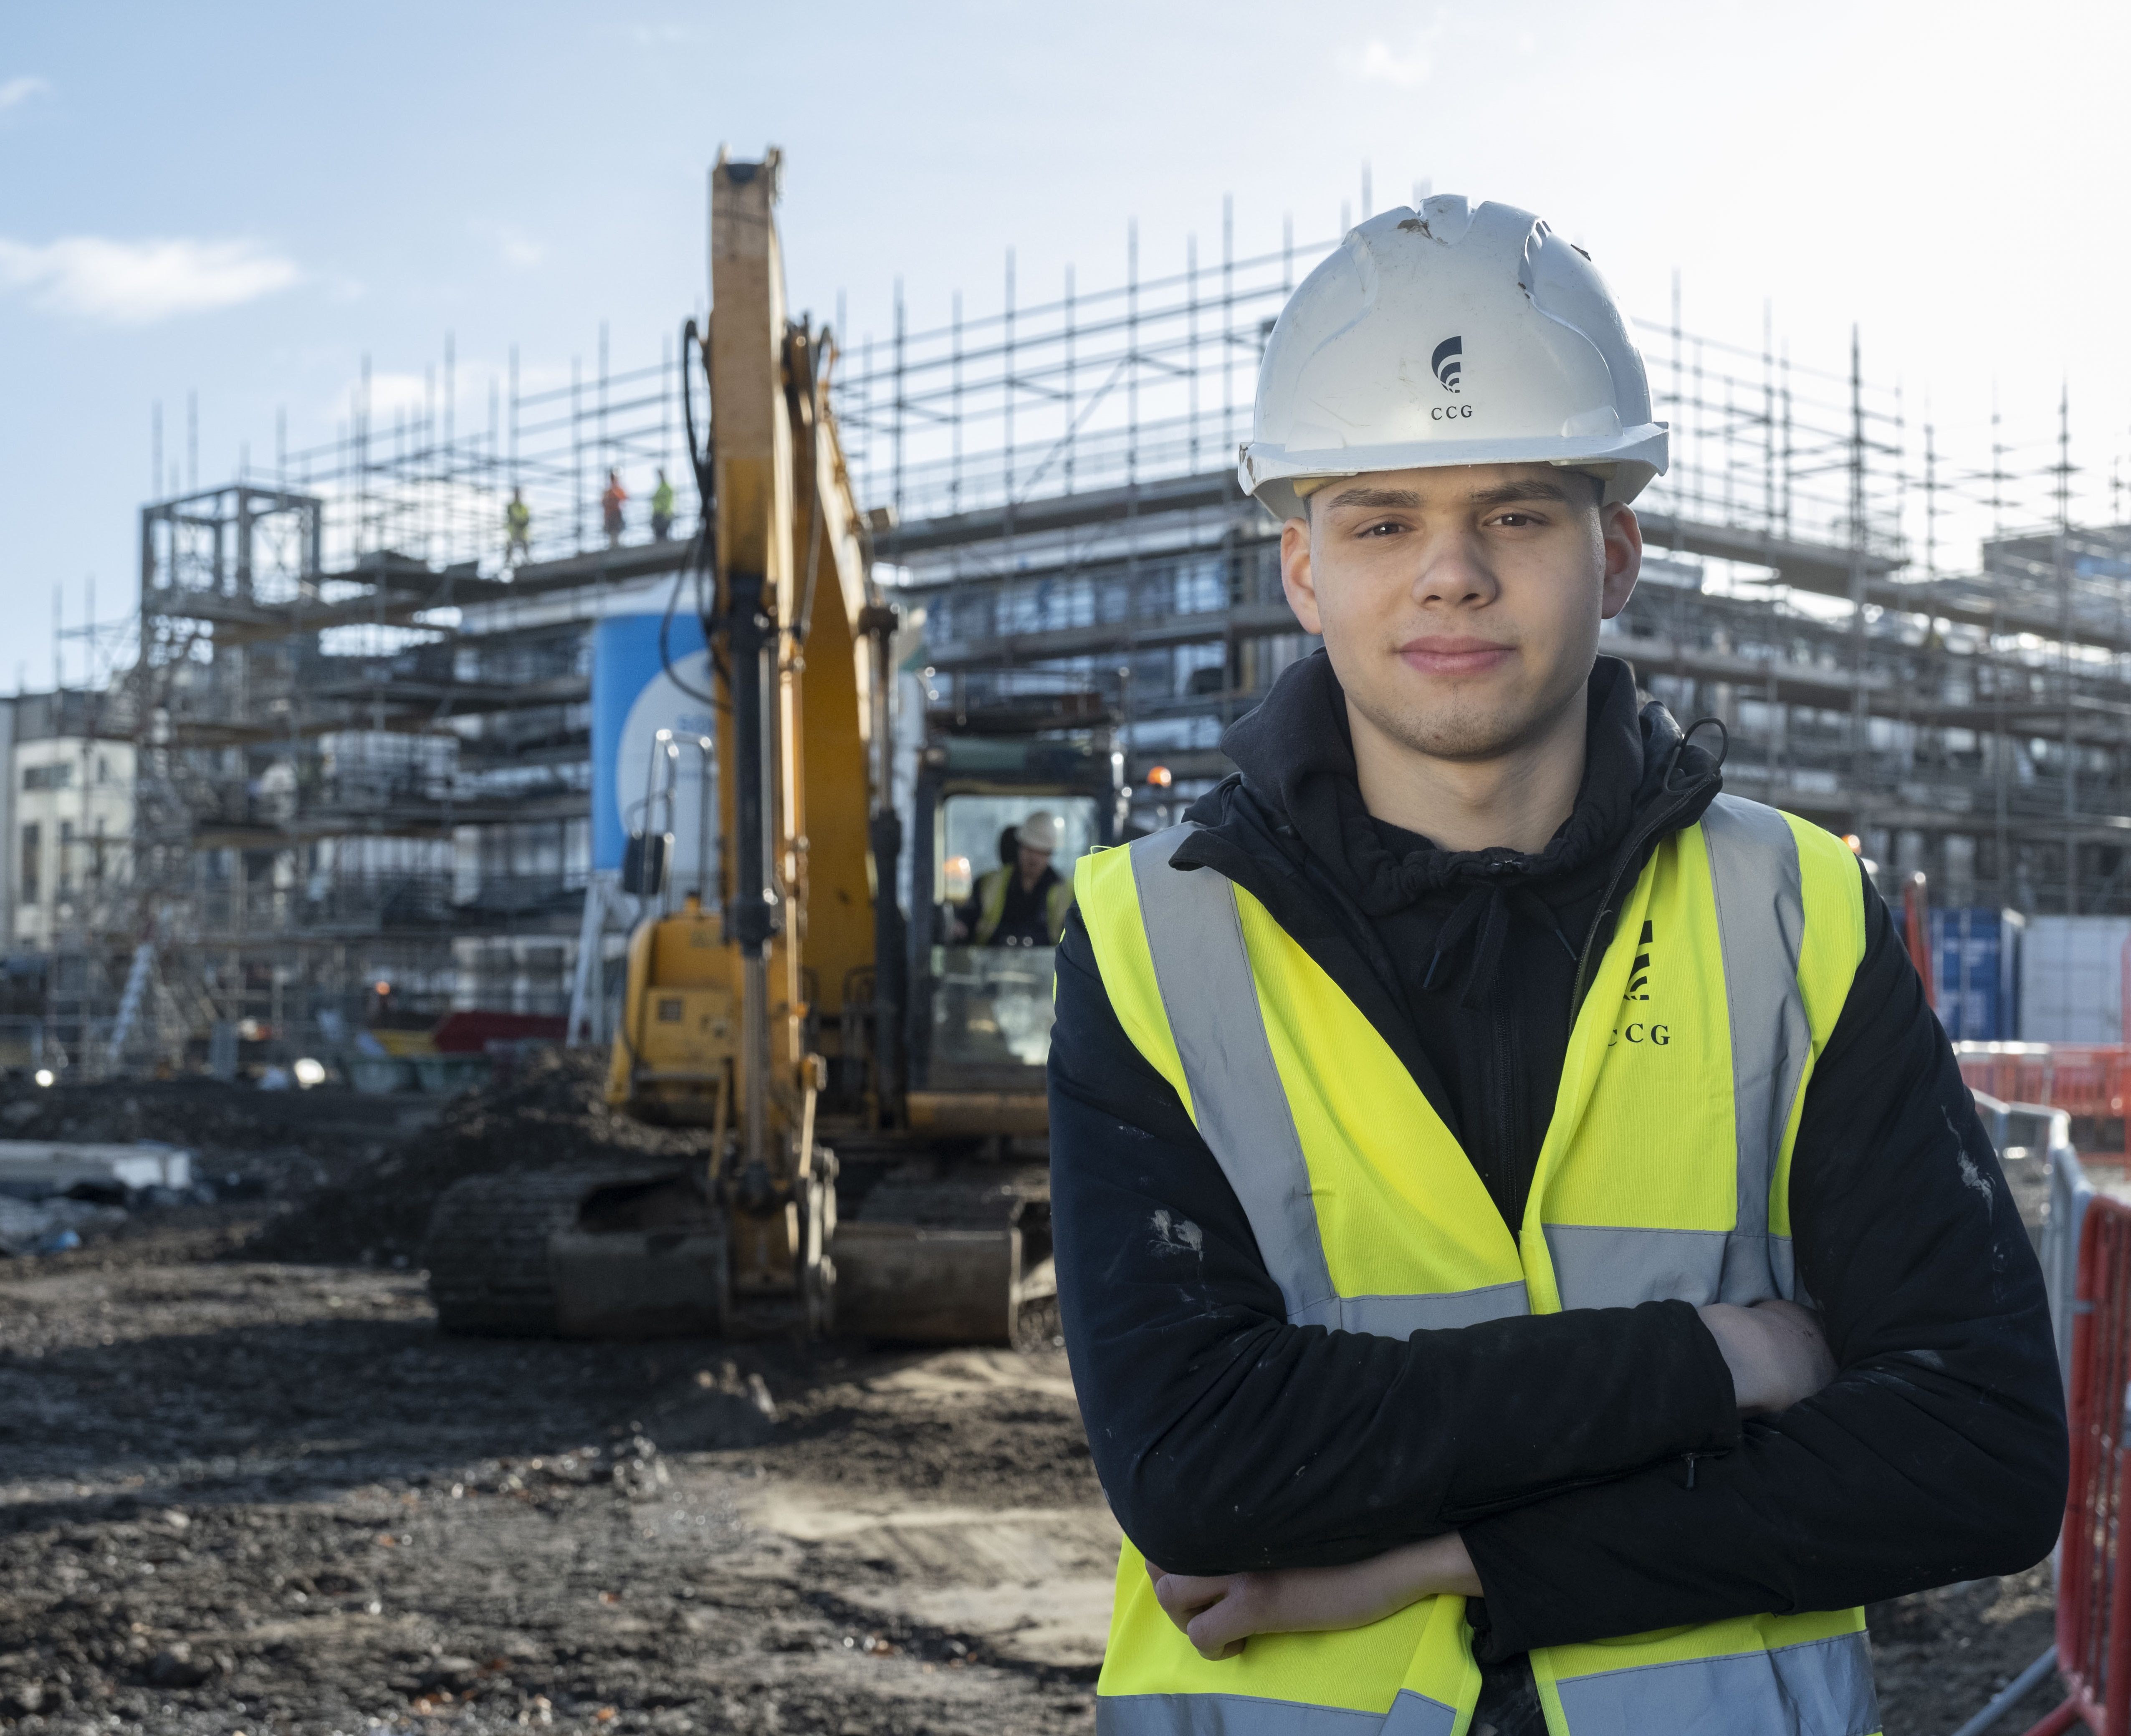 CCG continues to support skills development and replenishment with new construction apprentice intake